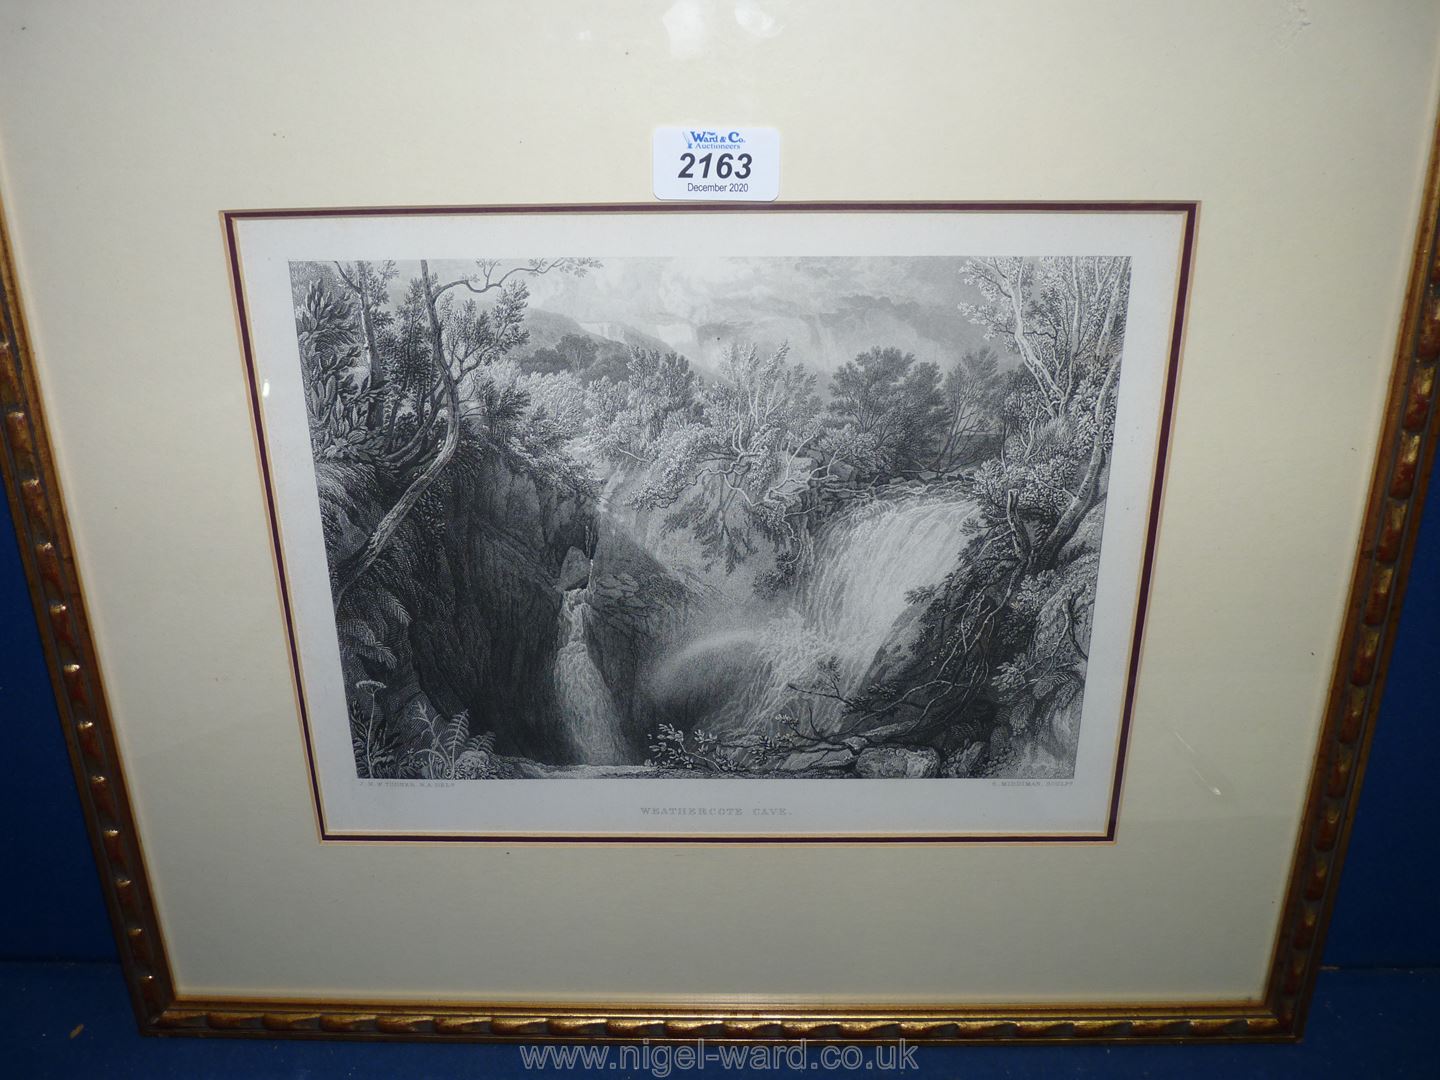 A 19th c. Engraving by S. Middiman, after an original painting by J.M.W.